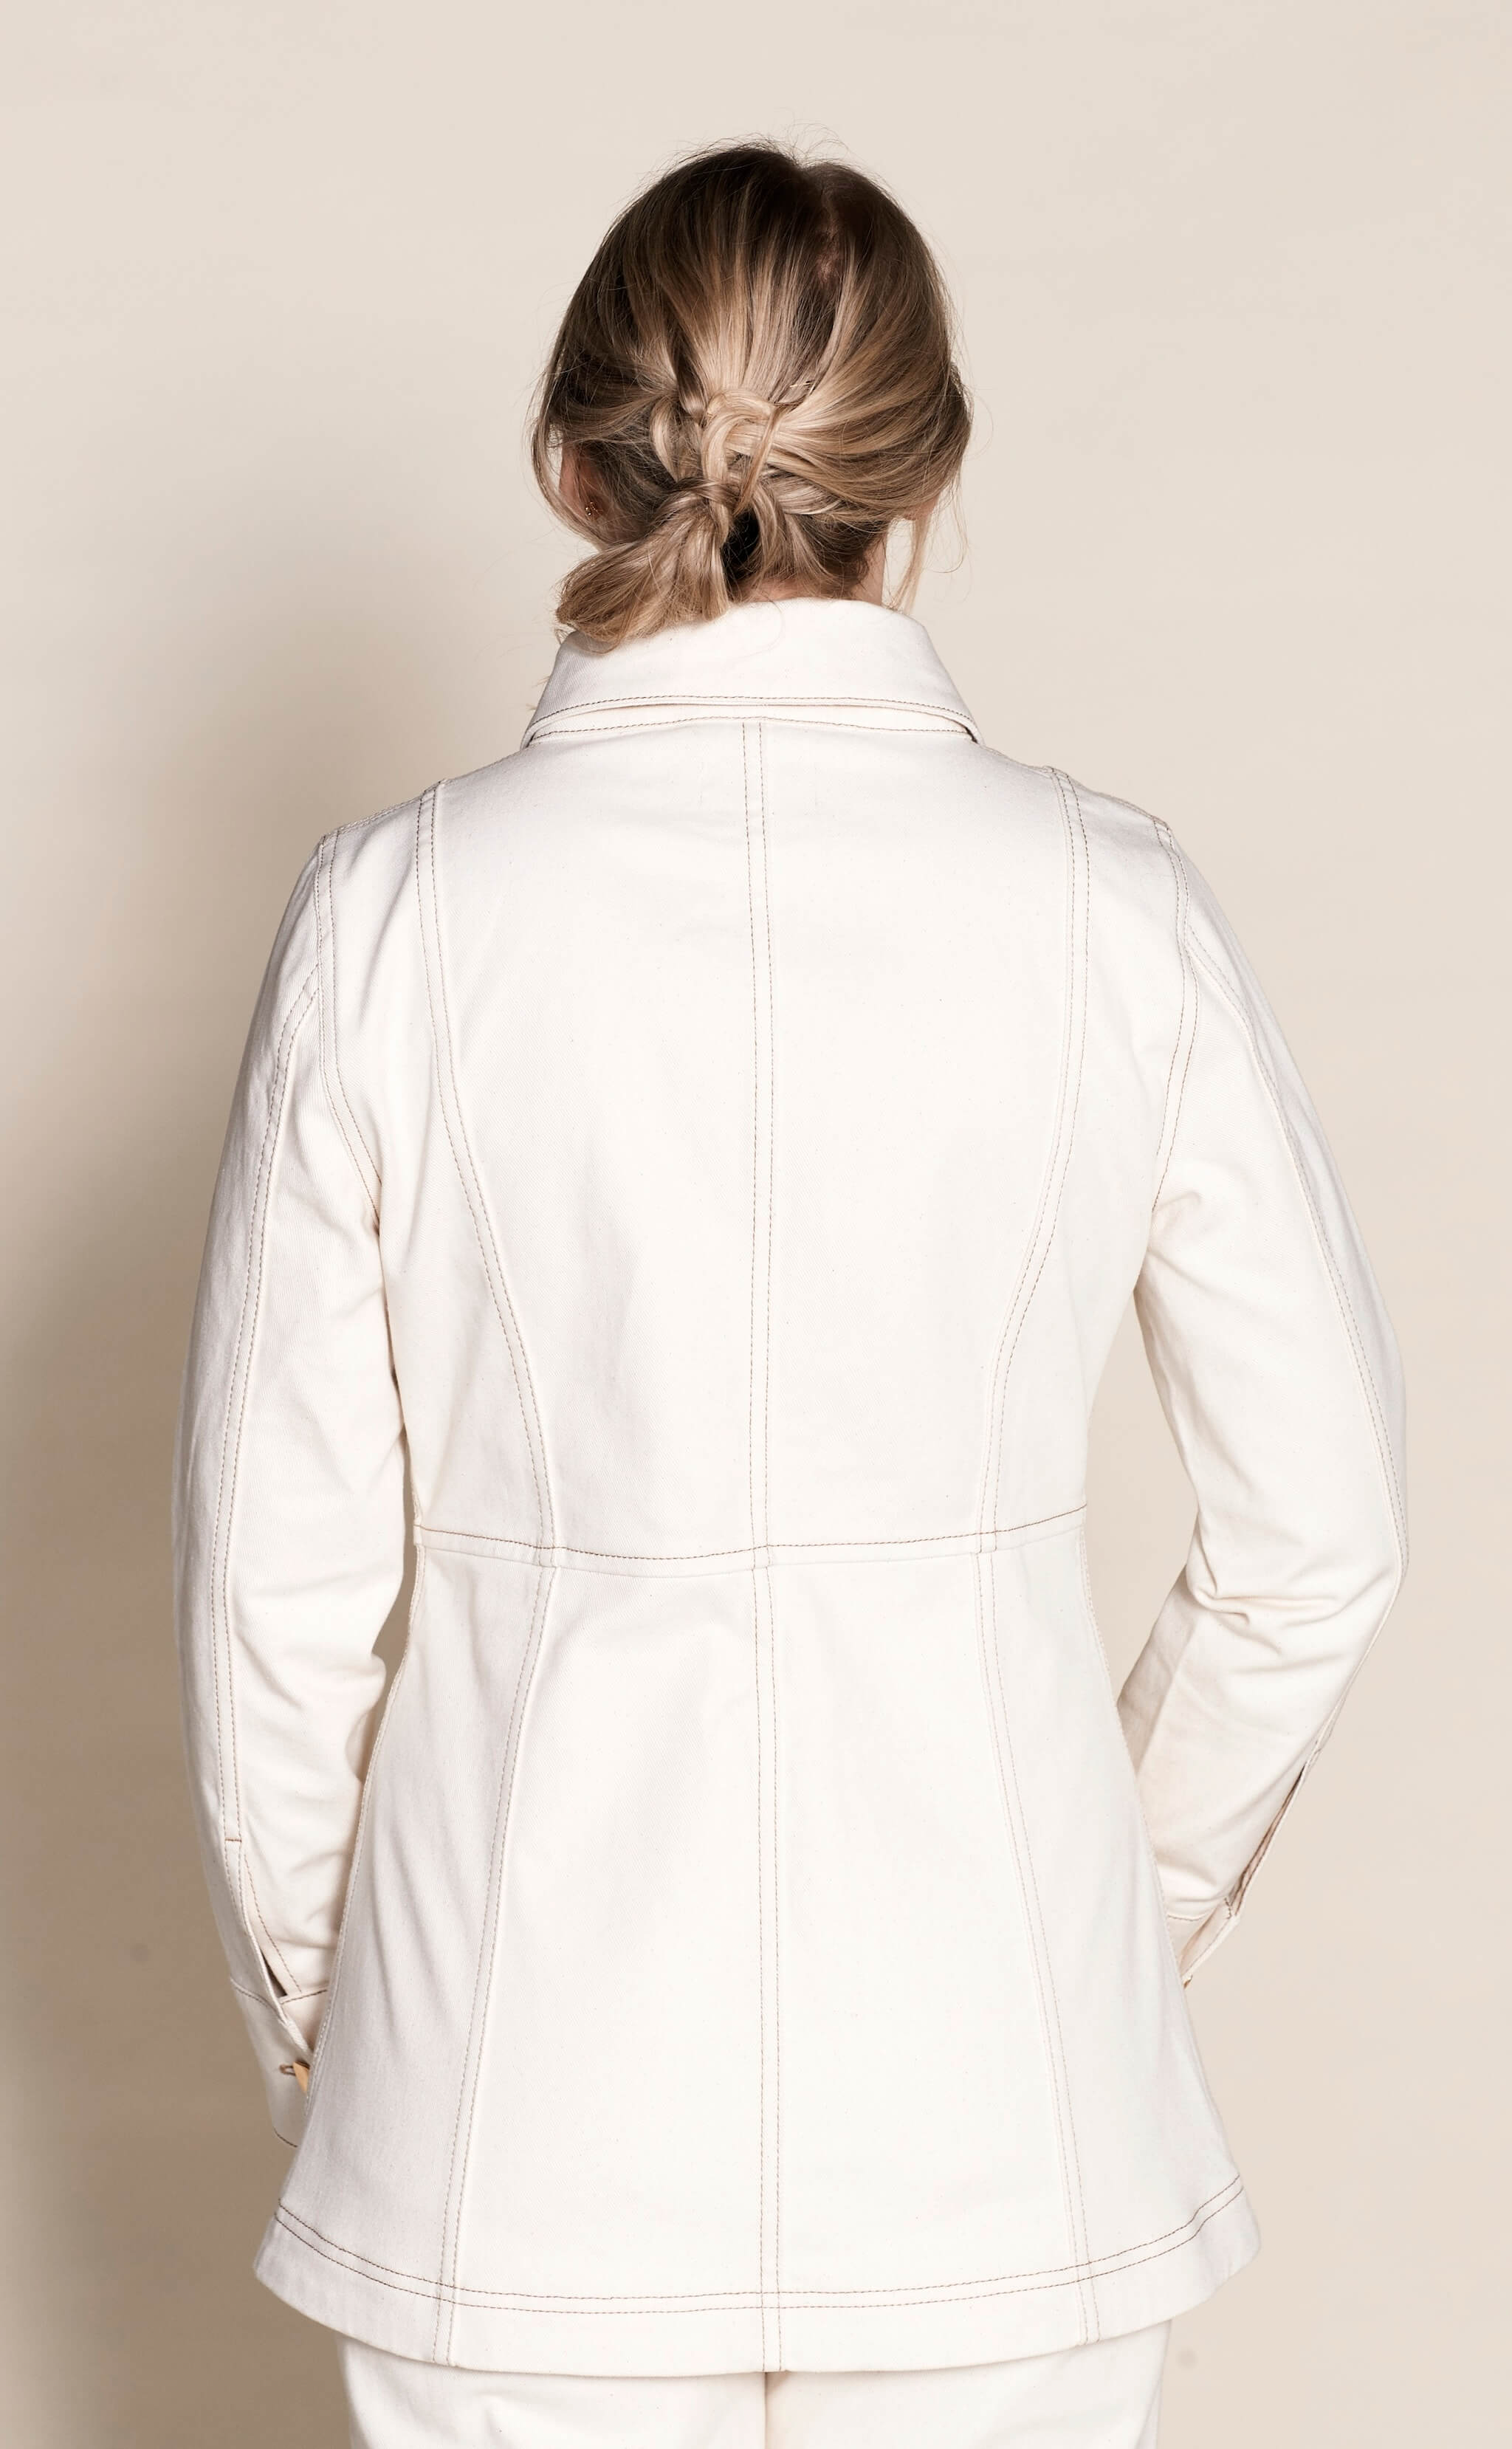 Rear view of a woman wearing Cyme Copenhagen's tailored cream denim jacket, exemplifying the brand's sleek Danish design and commitment to sustainable materials in fashion-forward women's clothing.